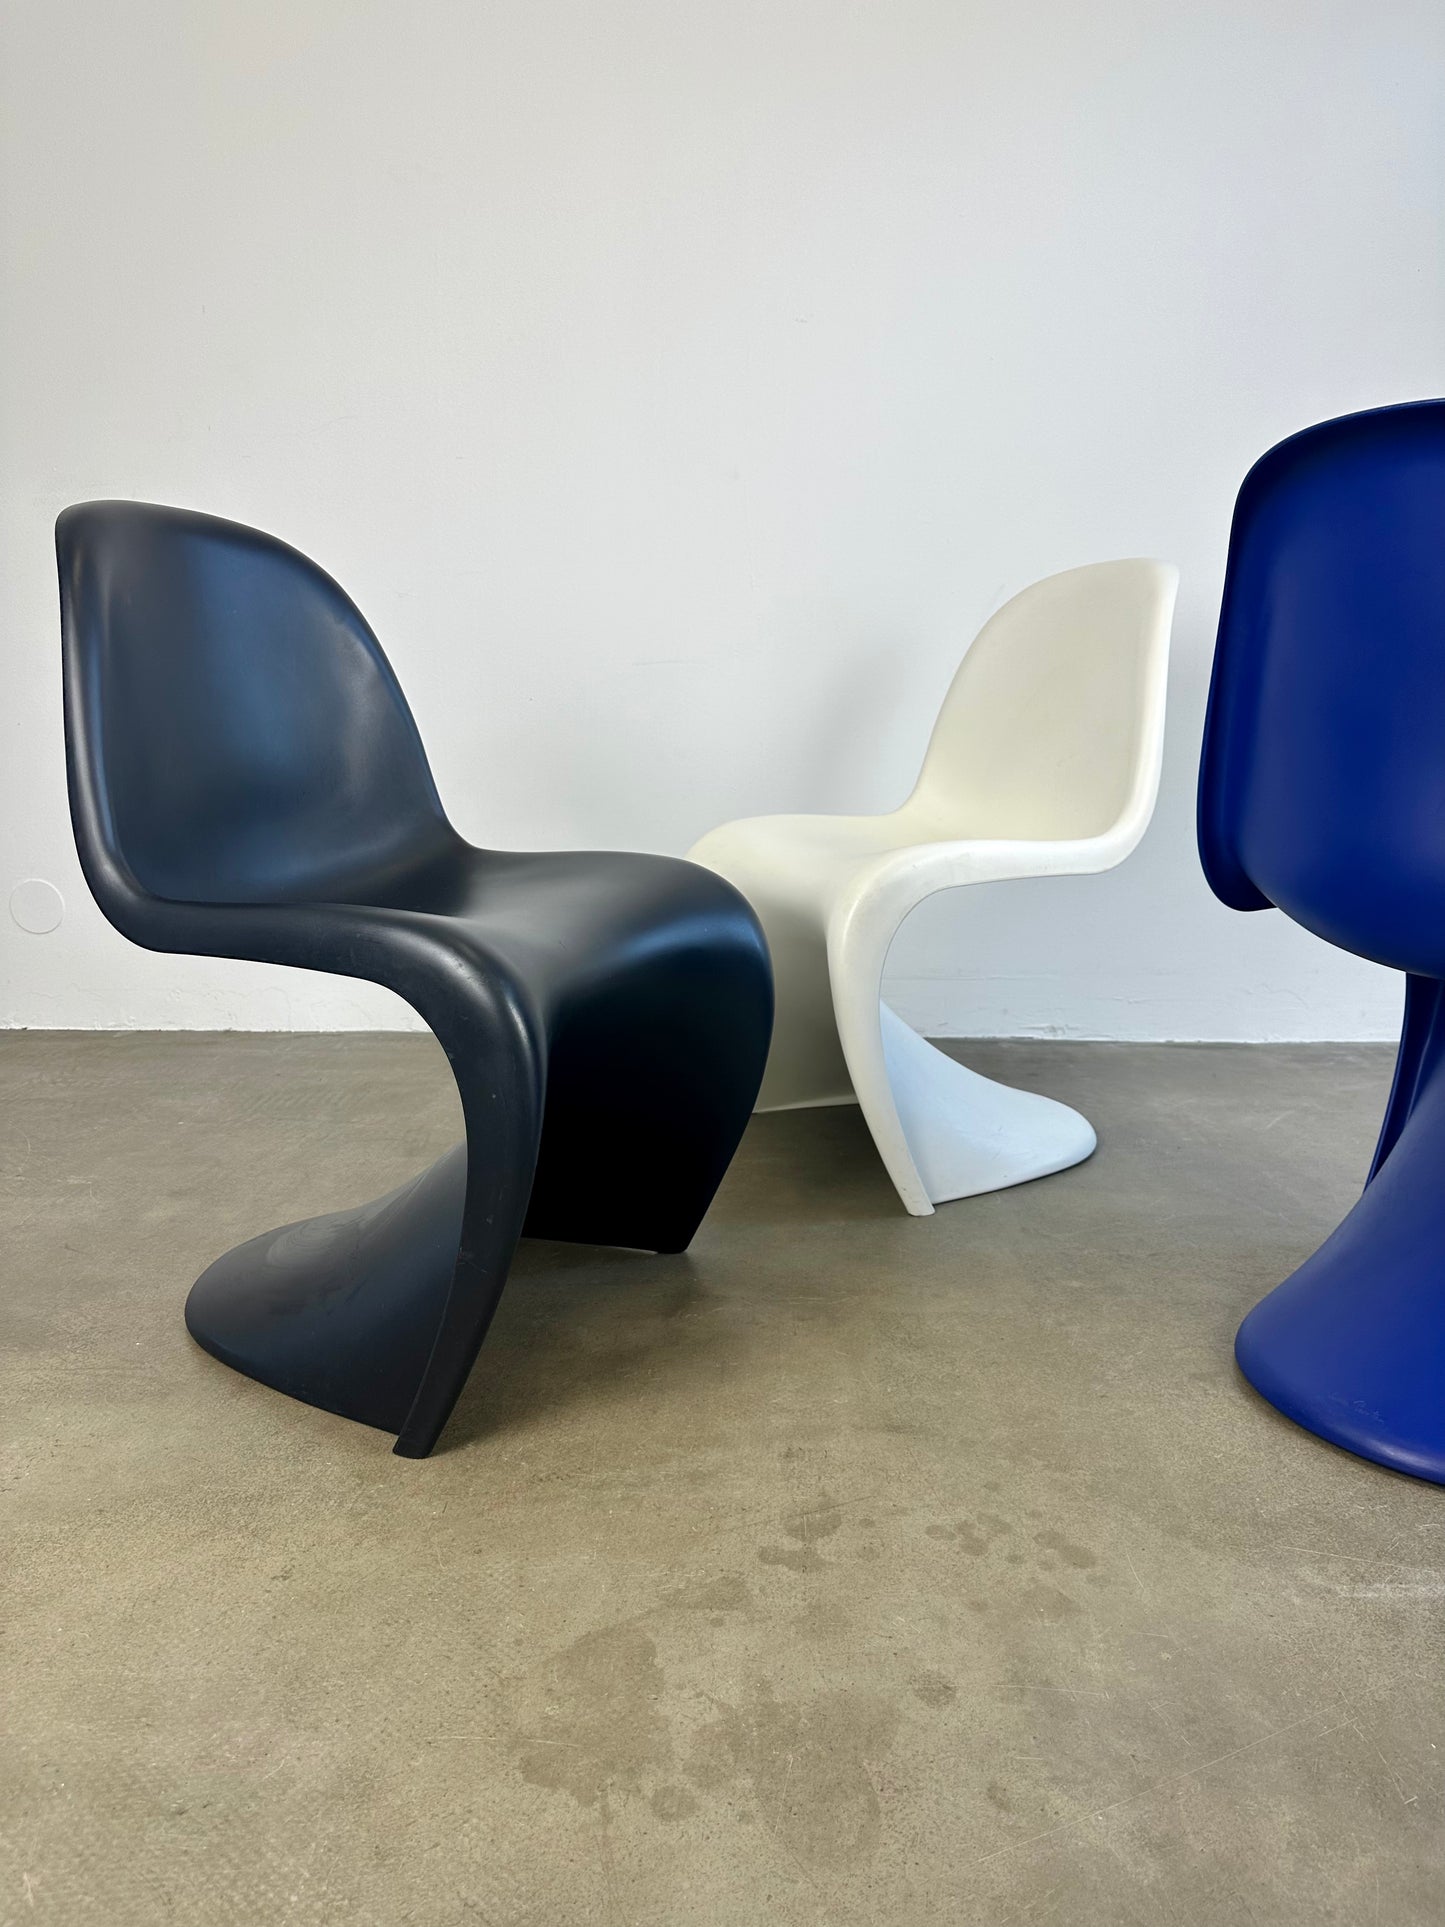 The black panton chair for Vitra